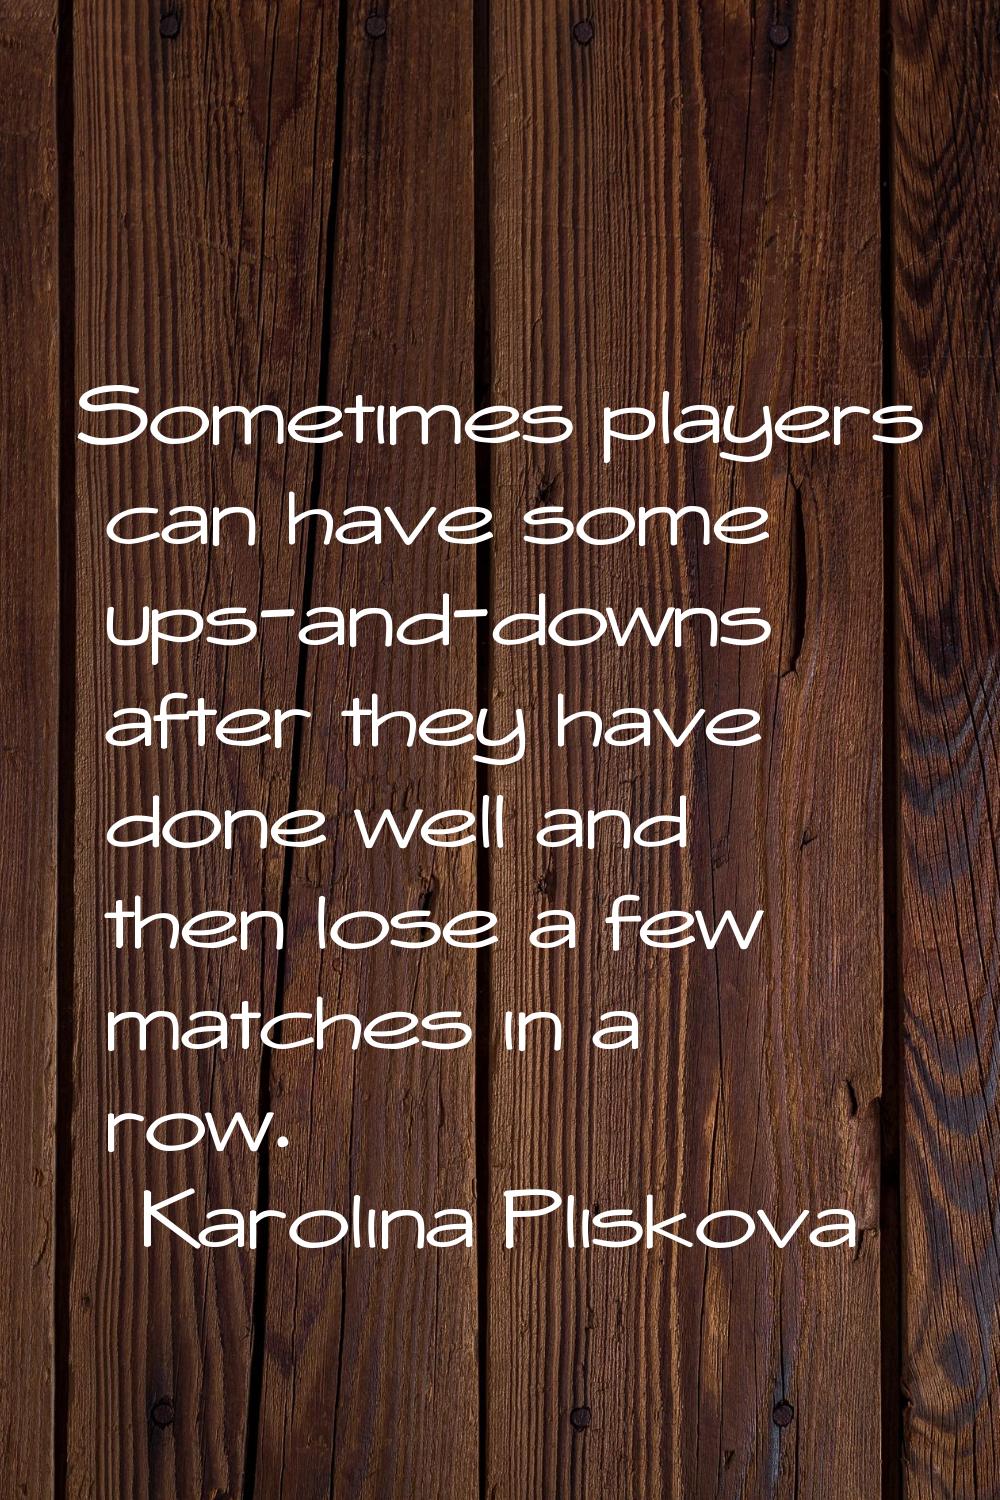 Sometimes players can have some ups-and-downs after they have done well and then lose a few matches